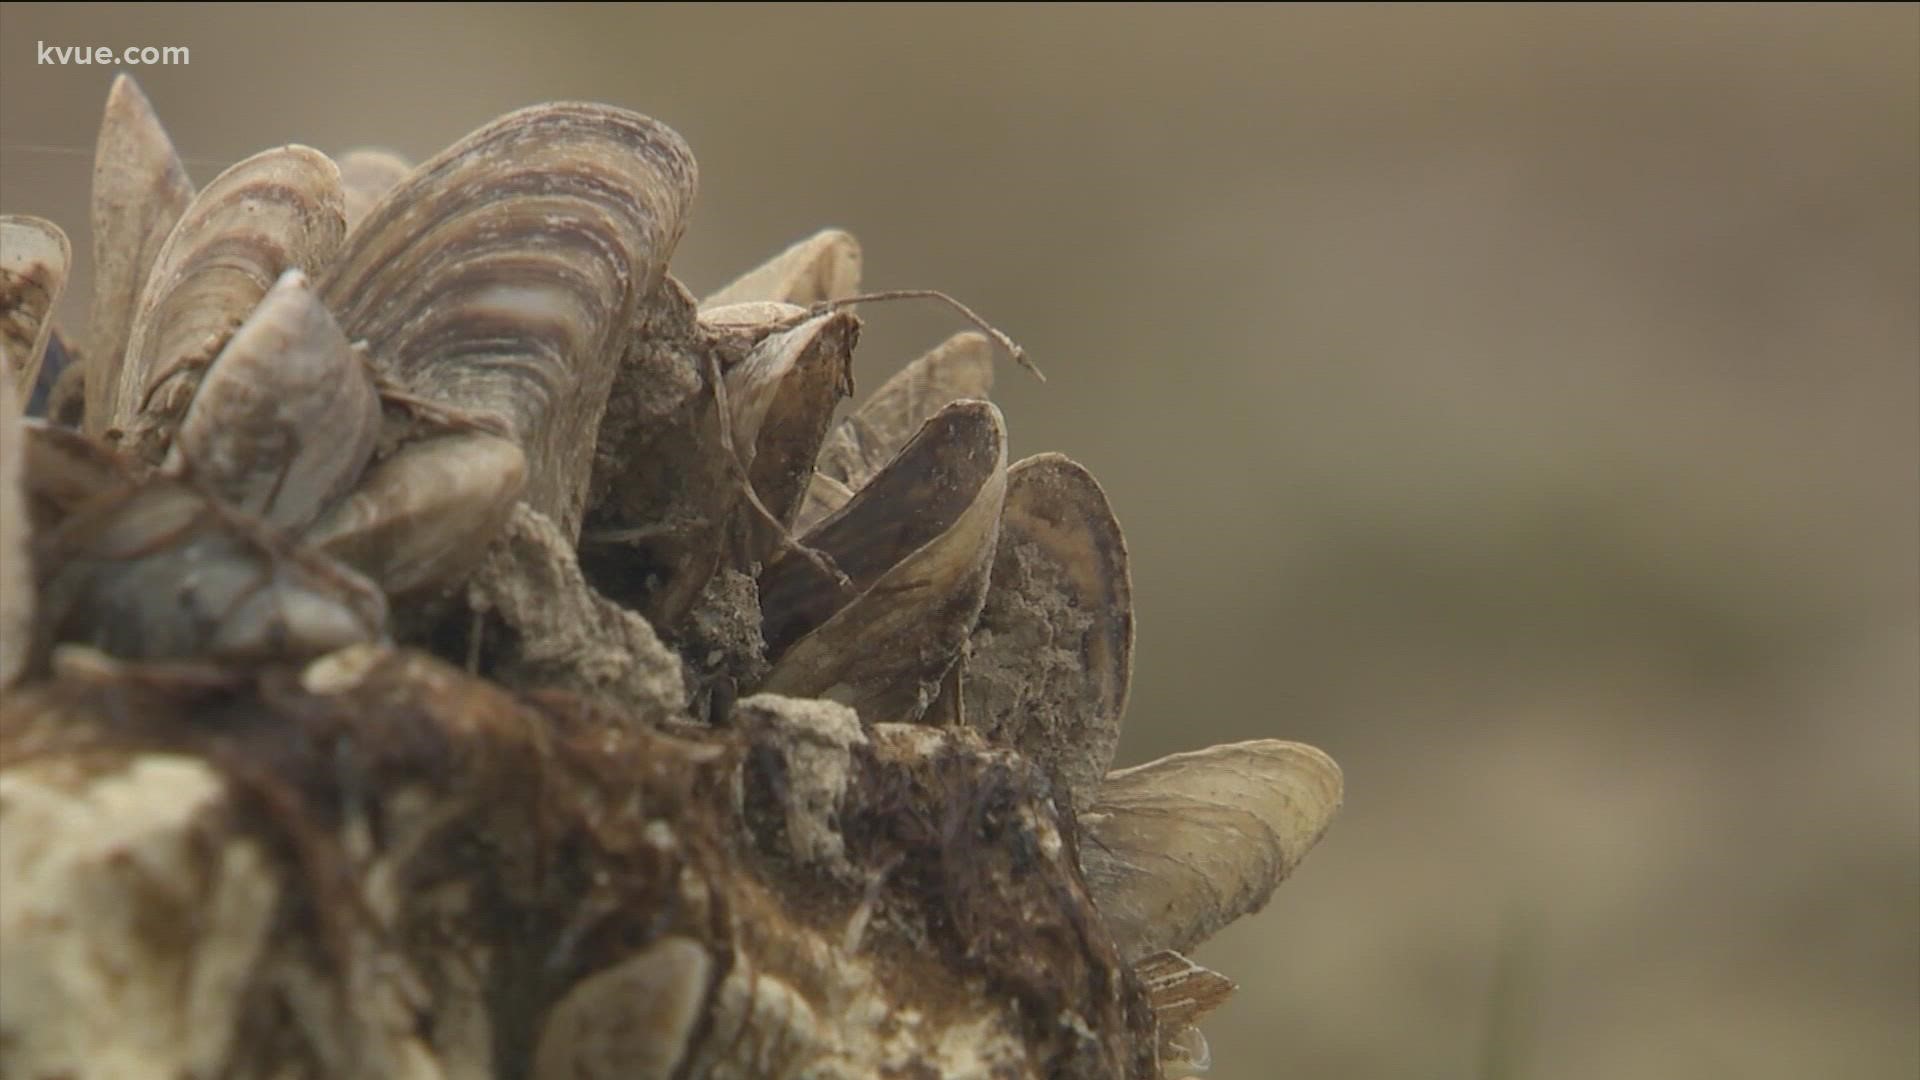 At Lake Georgetown, leaders are fighting zebra mussels that are spreading like wildfire.